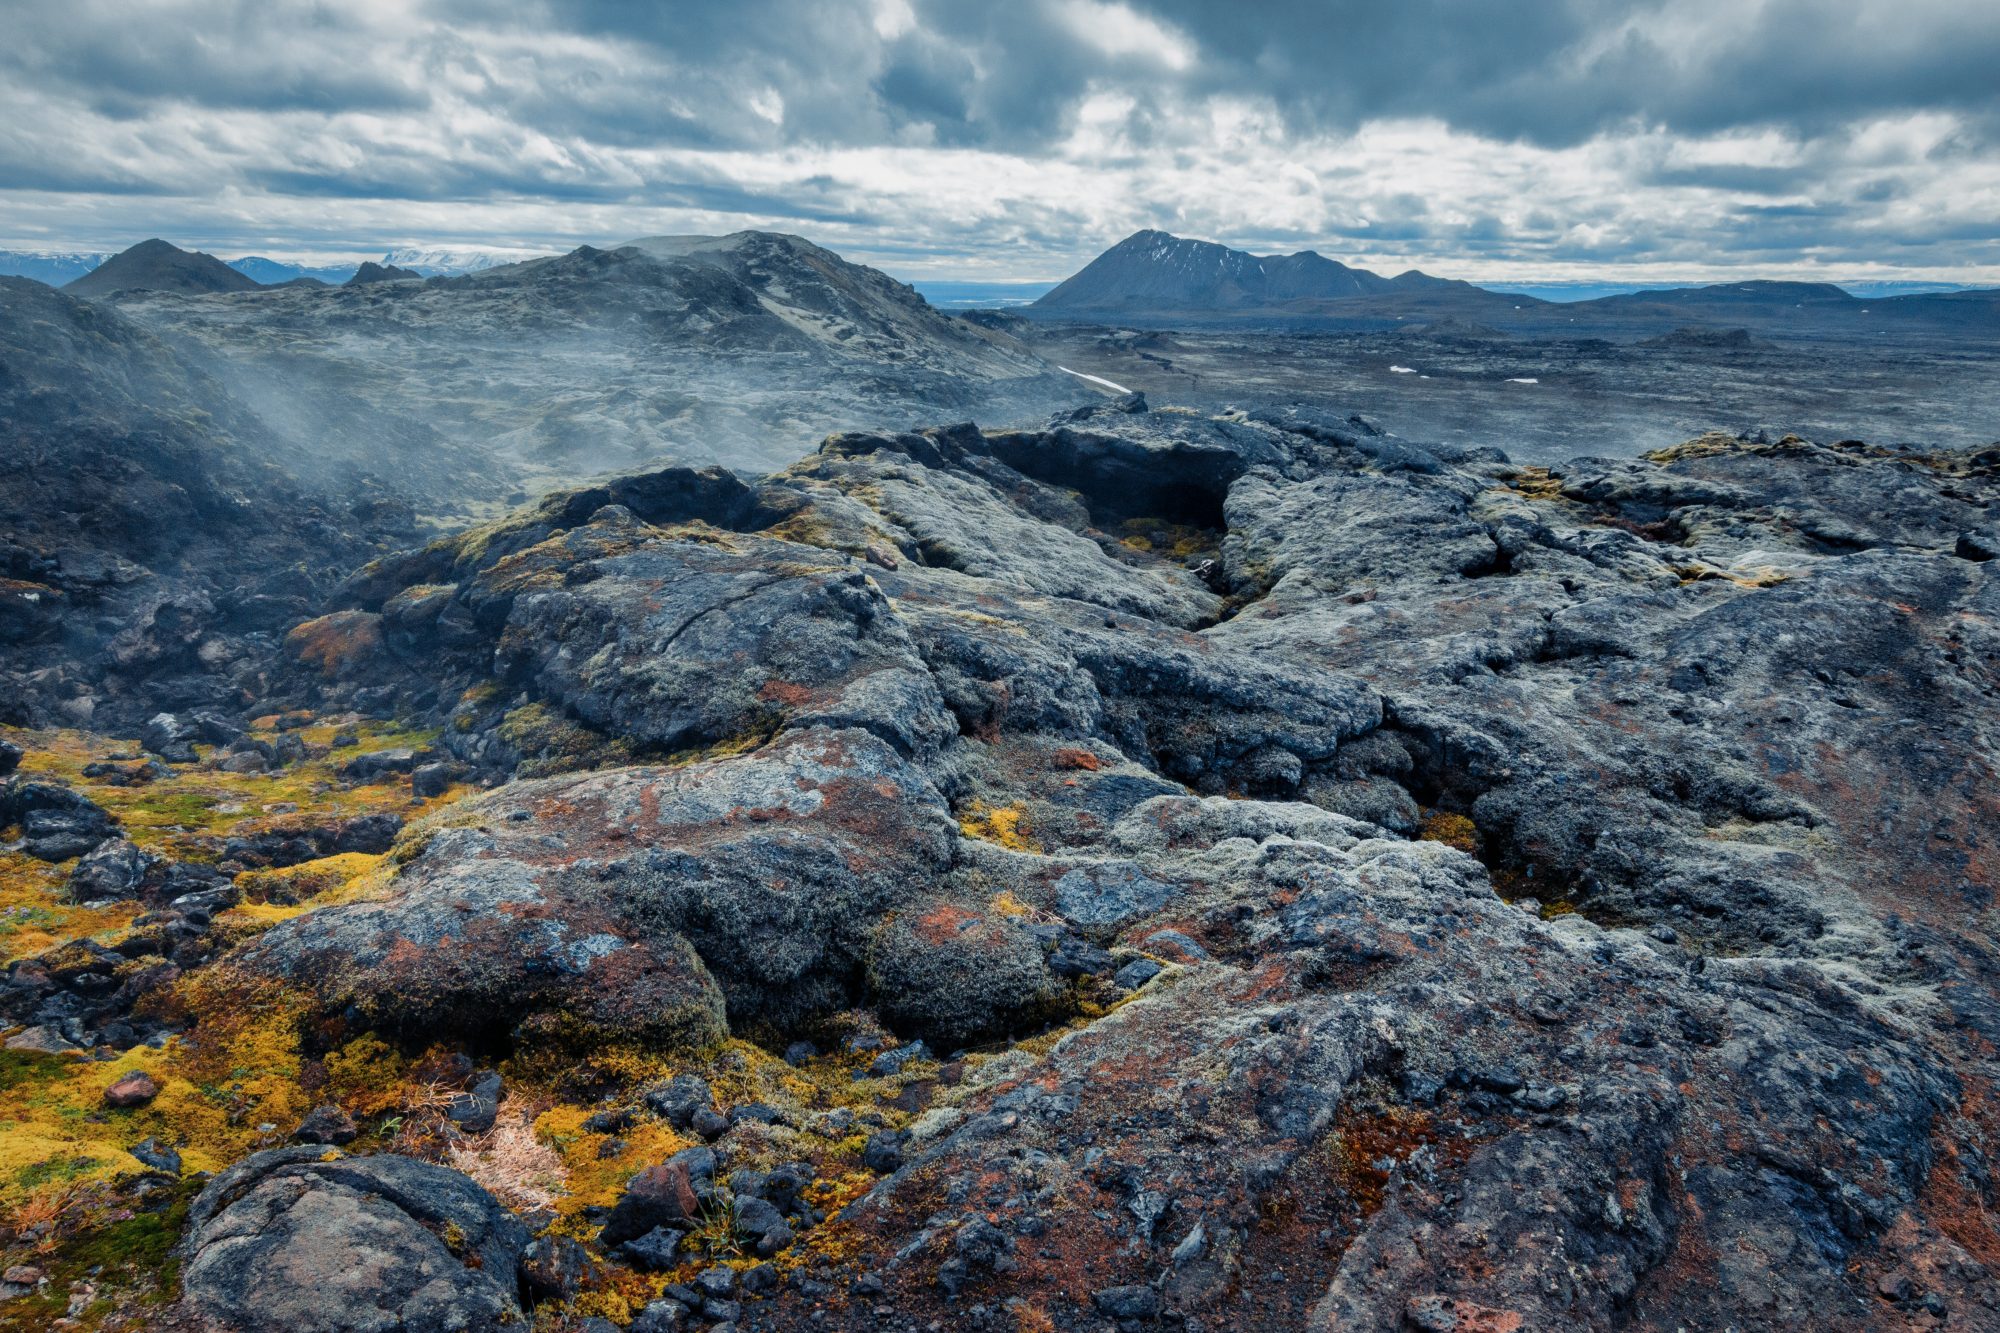 Volcanic field of rocks under storm clouds with mountains in background on Iceland